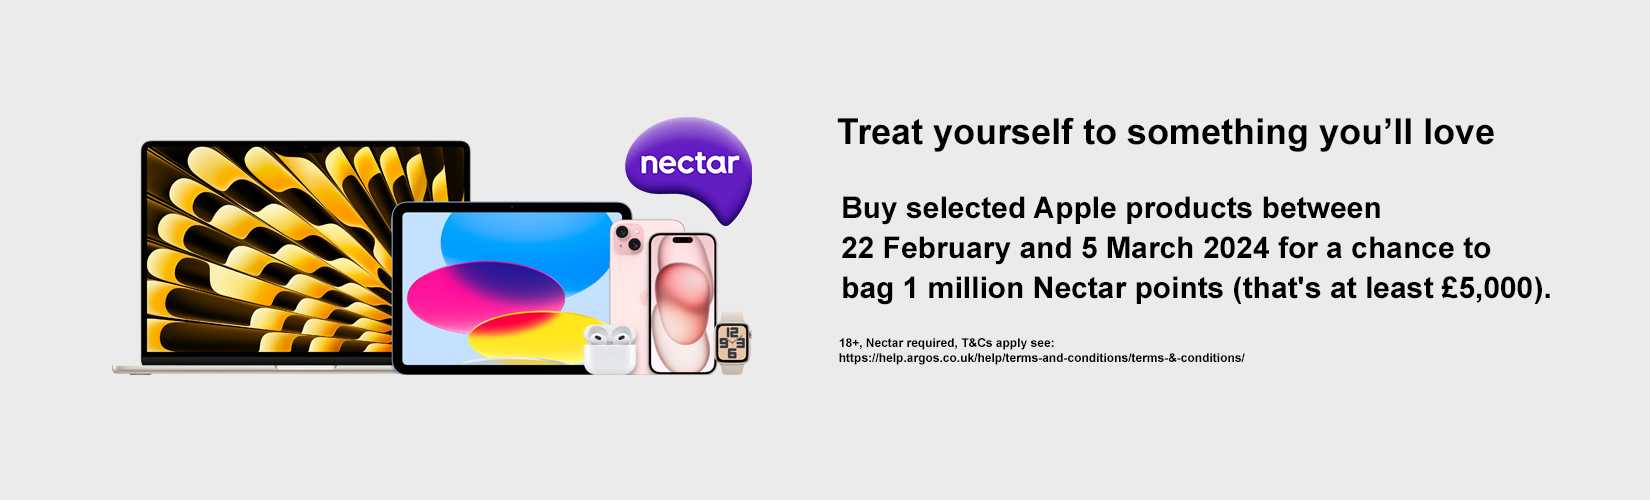 Apple. Nectar. Treat yourself something you"ll love. Buy selected Apple products between 22 Februray and 5 March 2024 for a chance to bag 1 million Nectar points(that's at least £5,000).